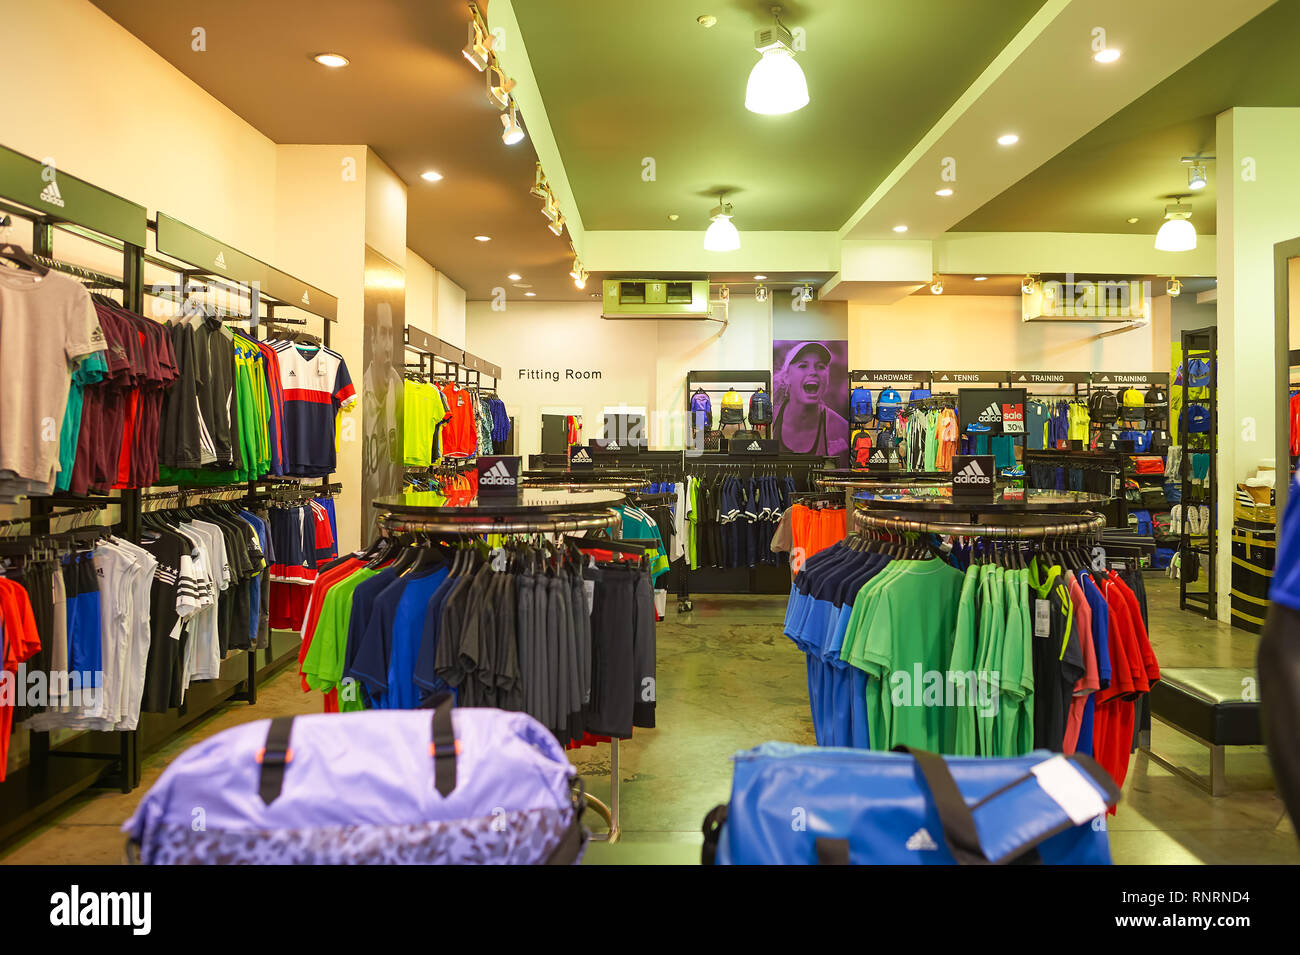 PATTAYA, THAILAND - FEBRUARY 21, 2016: Adidas outlet in Pattaya. Adidas AG  is a German multinational corporation that designs and manufactures sports  Stock Photo - Alamy